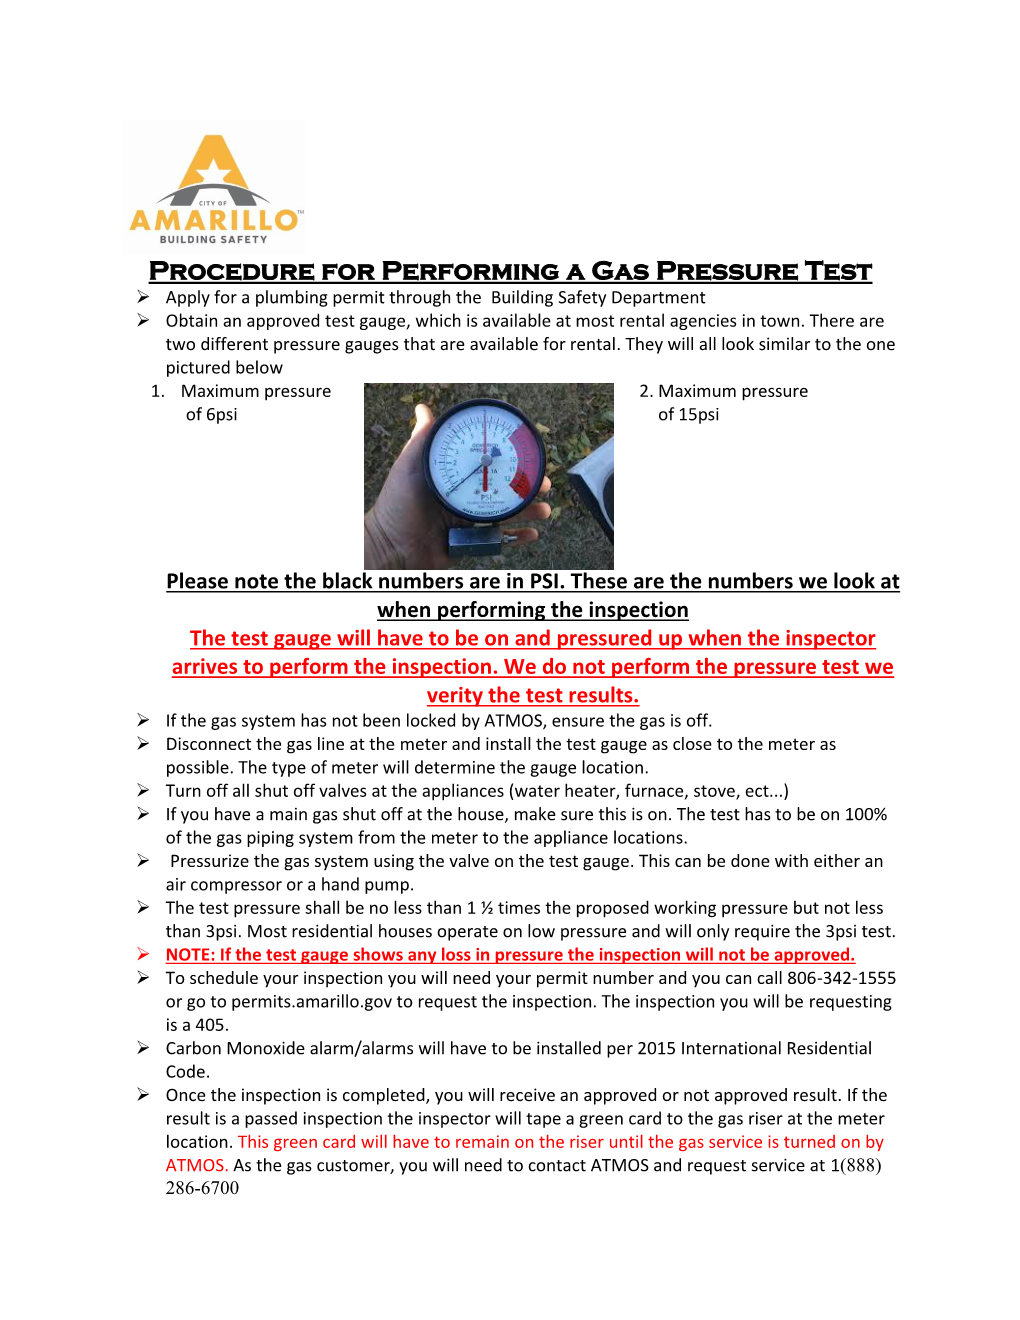 Procedure for Performing a Gas Pressure Test